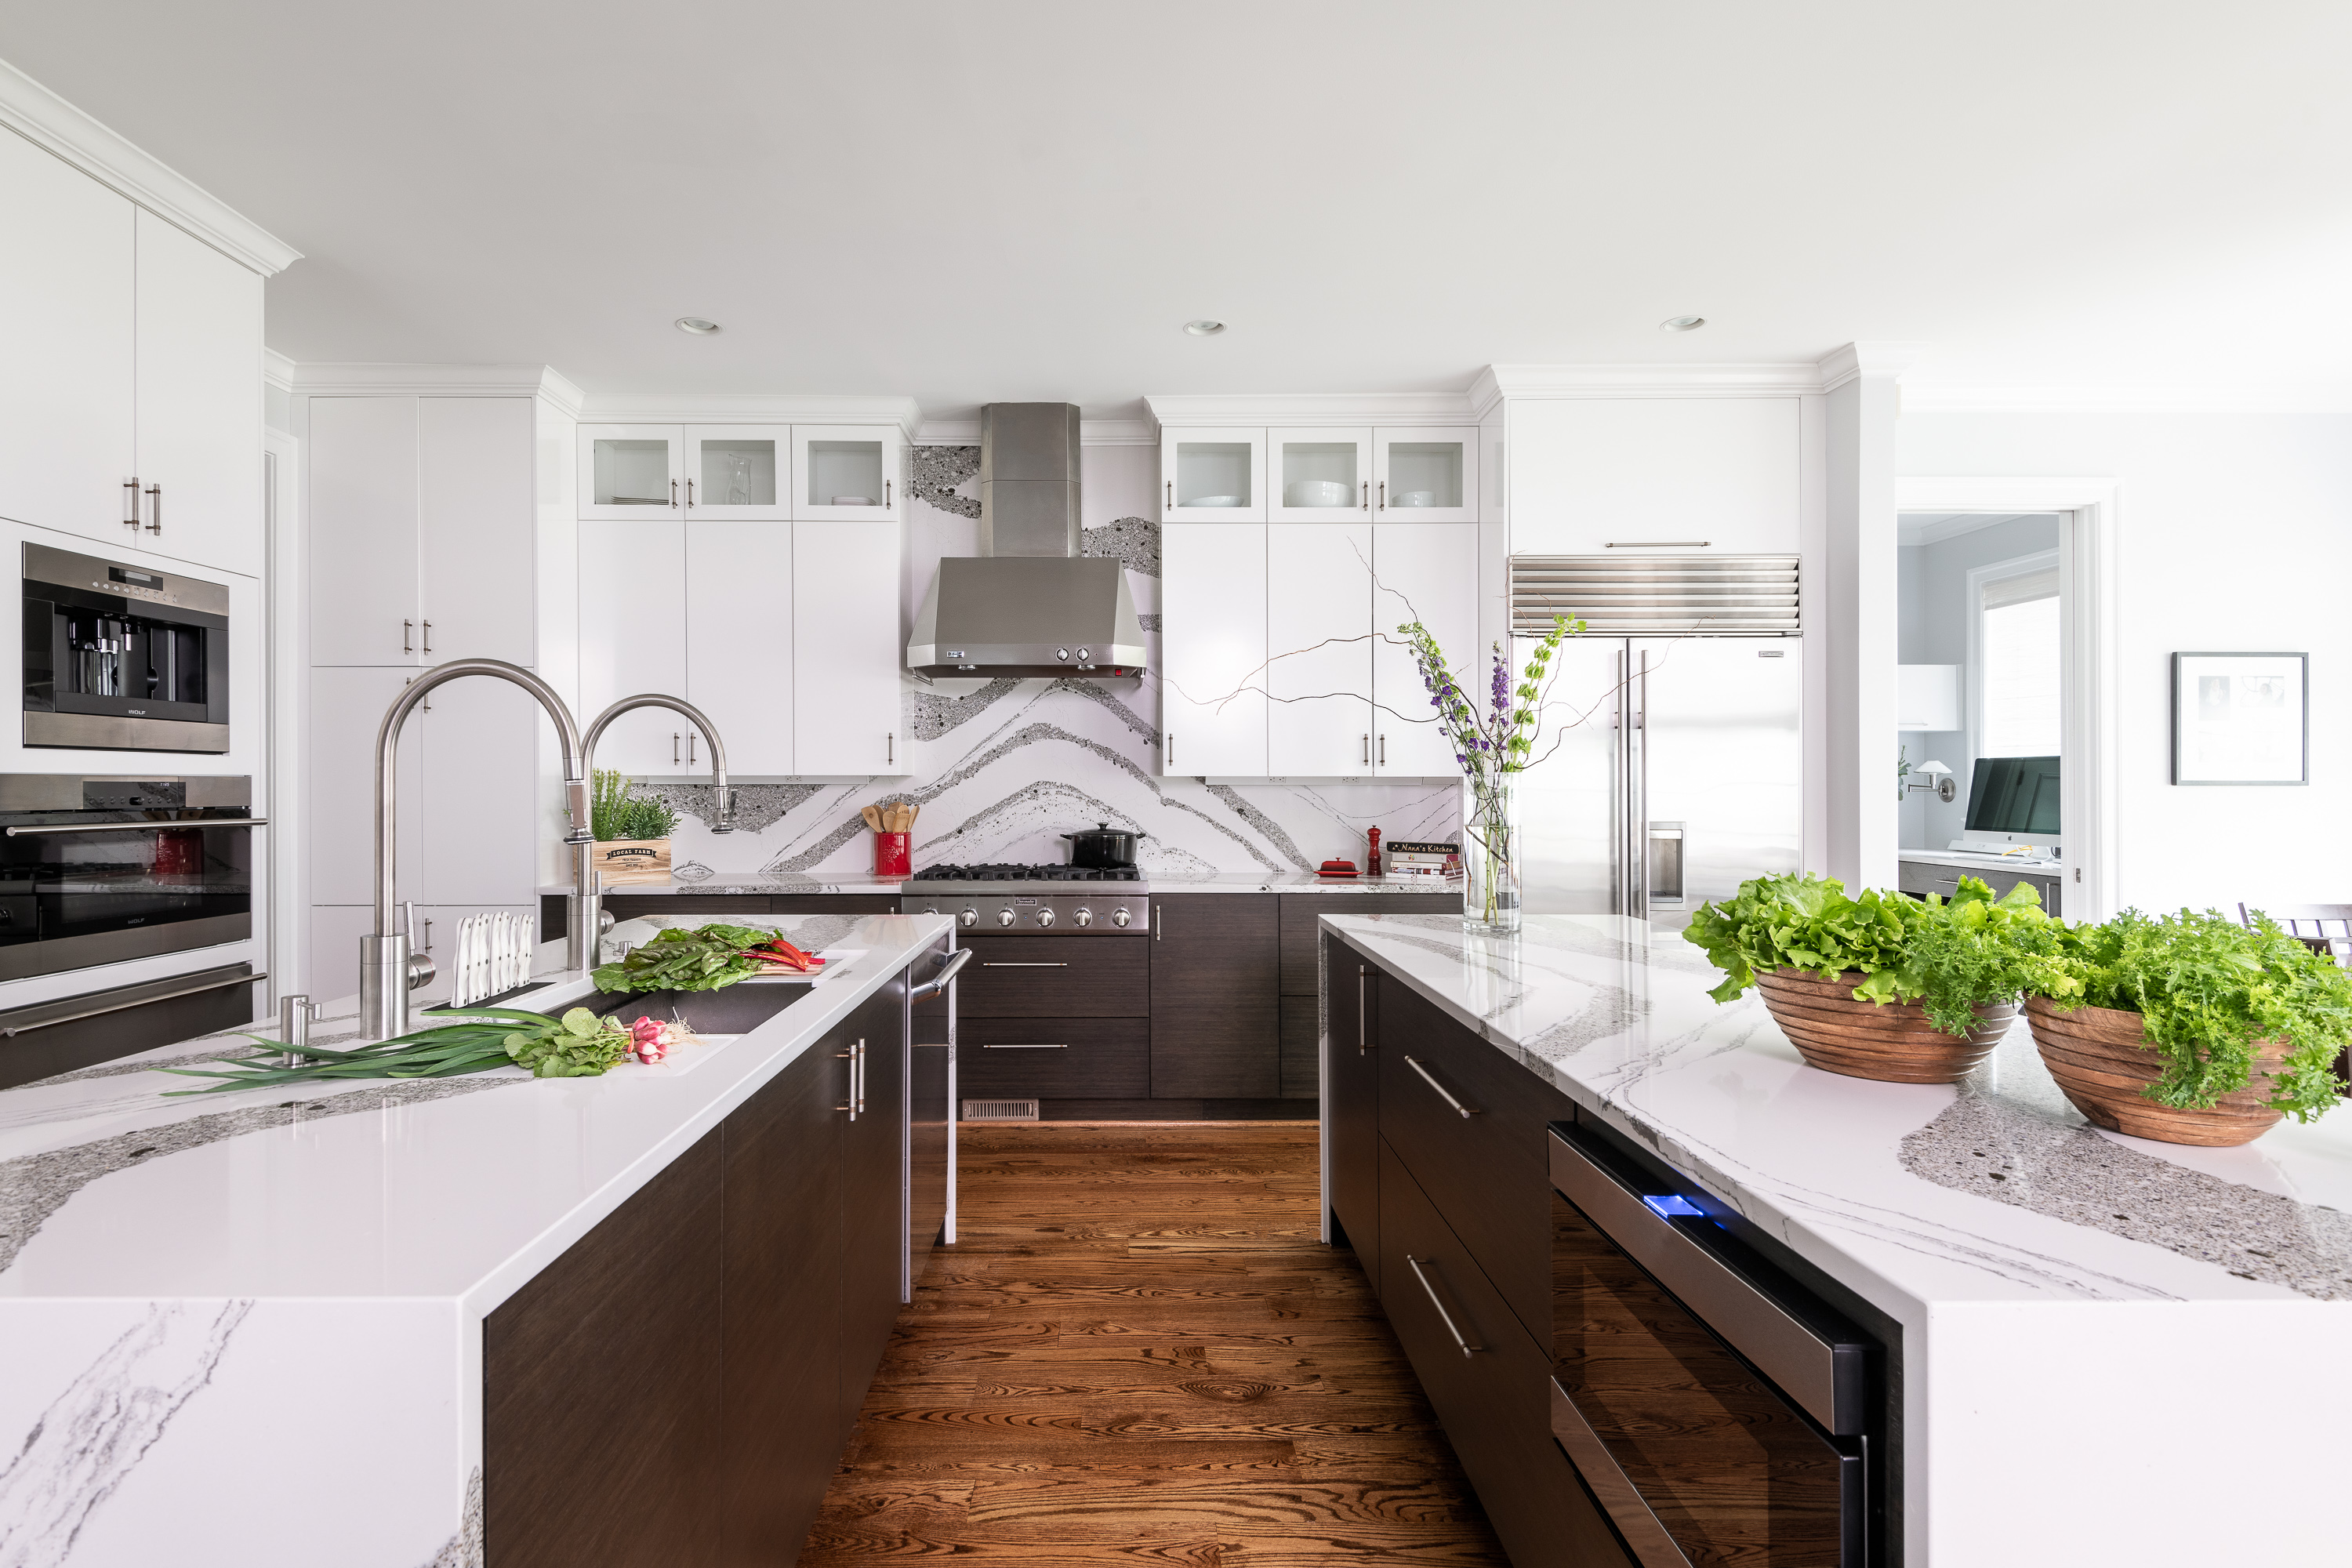 The kitchen features granite countertops, electric appliances, and